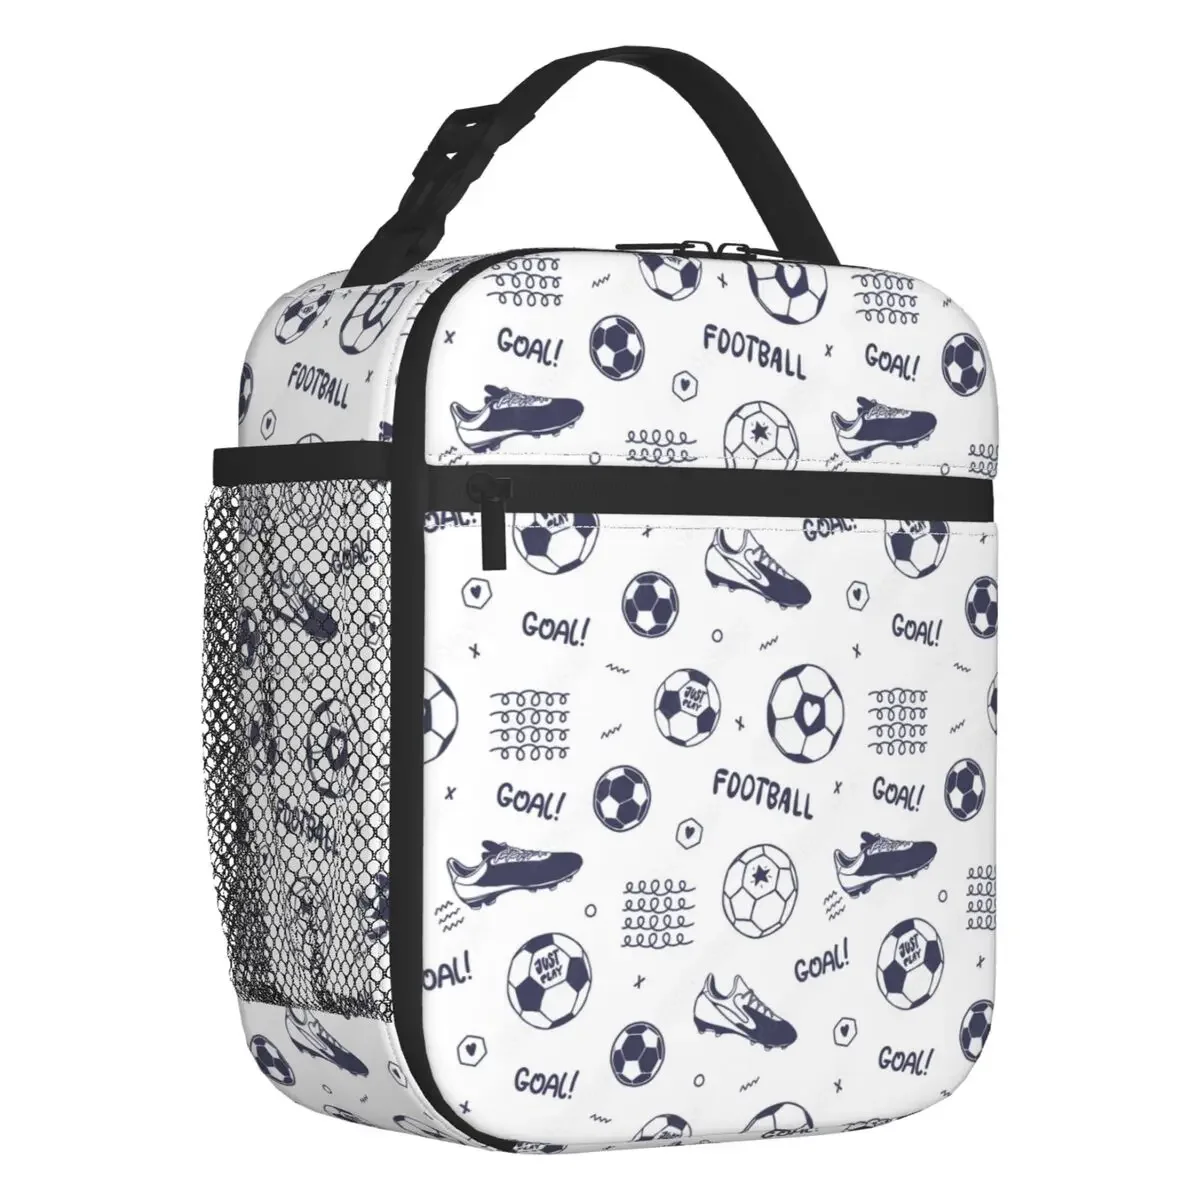 https://ae01.alicdn.com/kf/S8d852a8d0a4441c8ba43806ae114efa8j/Football-Soccer-Sport-Hand-Drawn-Cartoon-Lunch-Box-Multifunction-Cooler-Thermal-Food-Insulated-Lunch-Bag-School.jpg